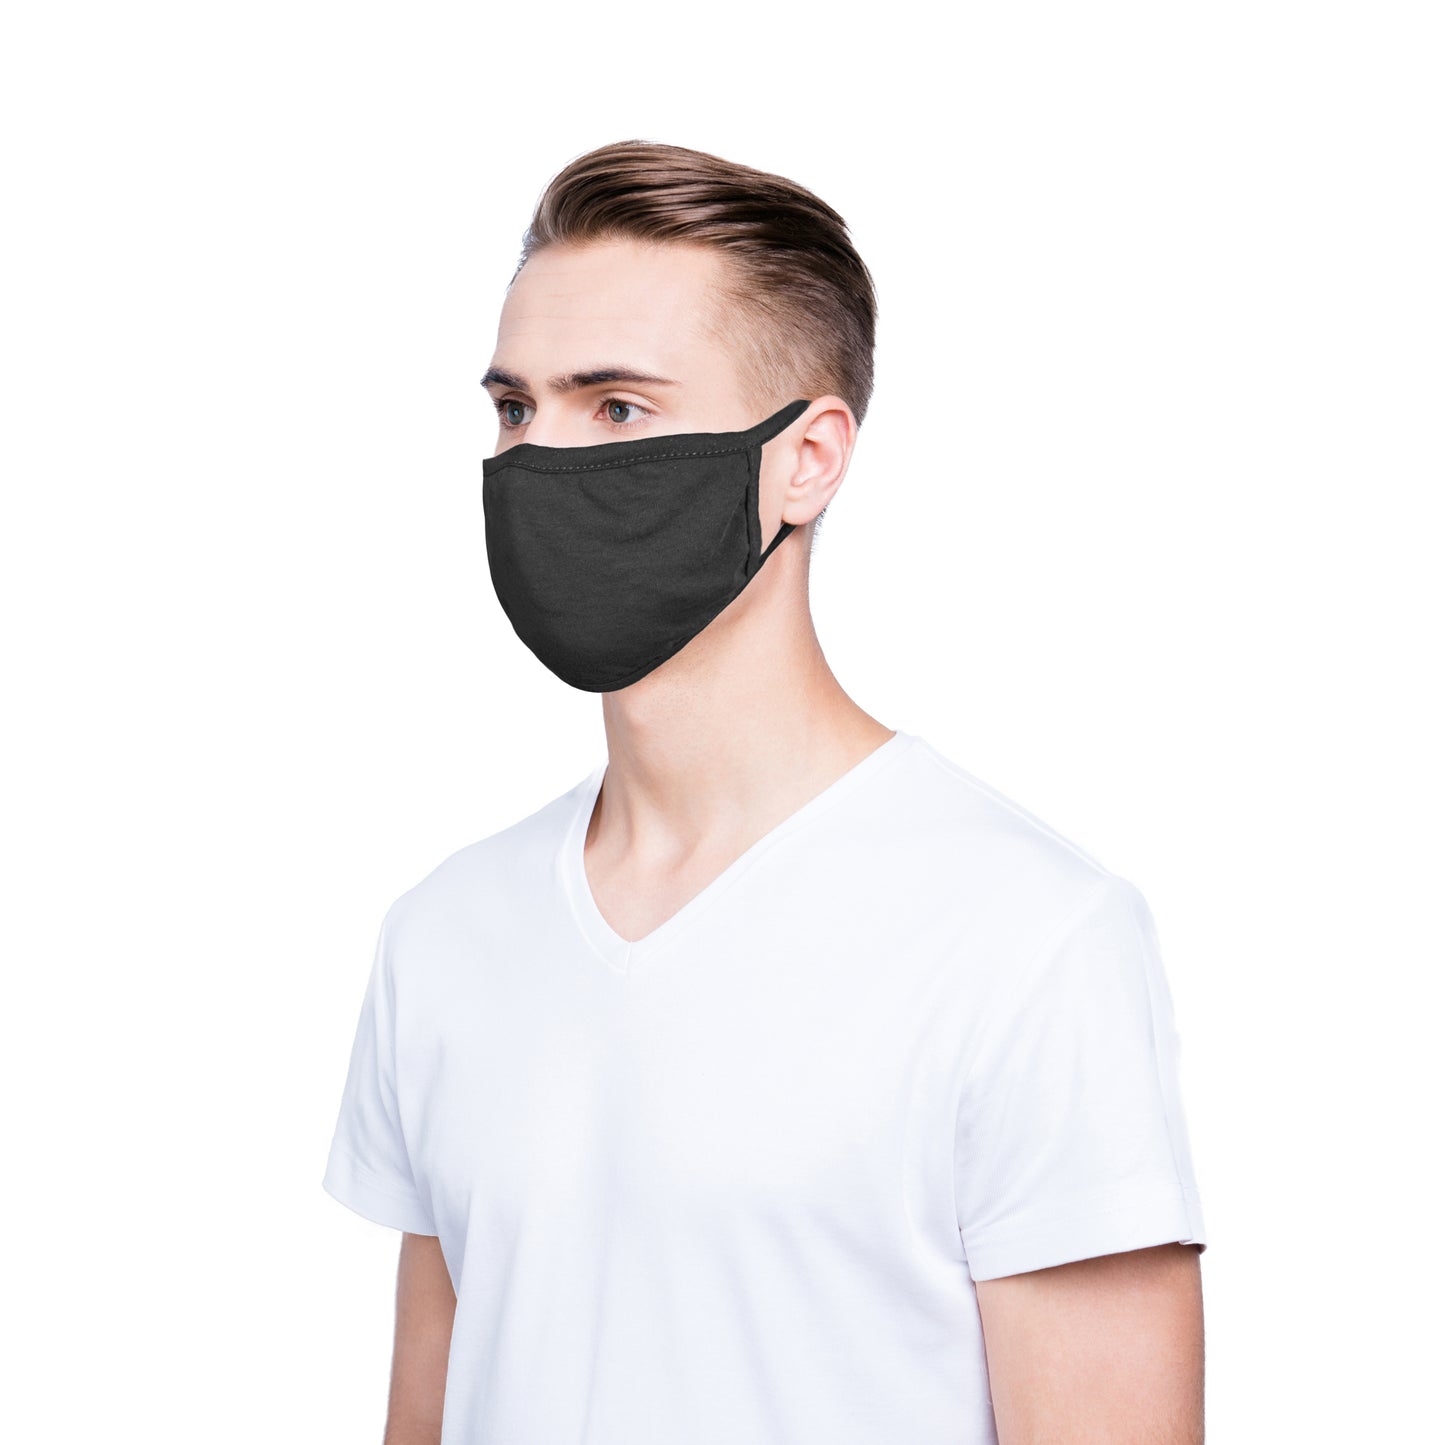 DALIX 3 Pack Premium Cotton Mask Reuseable Washable Made in USA (Black, White)